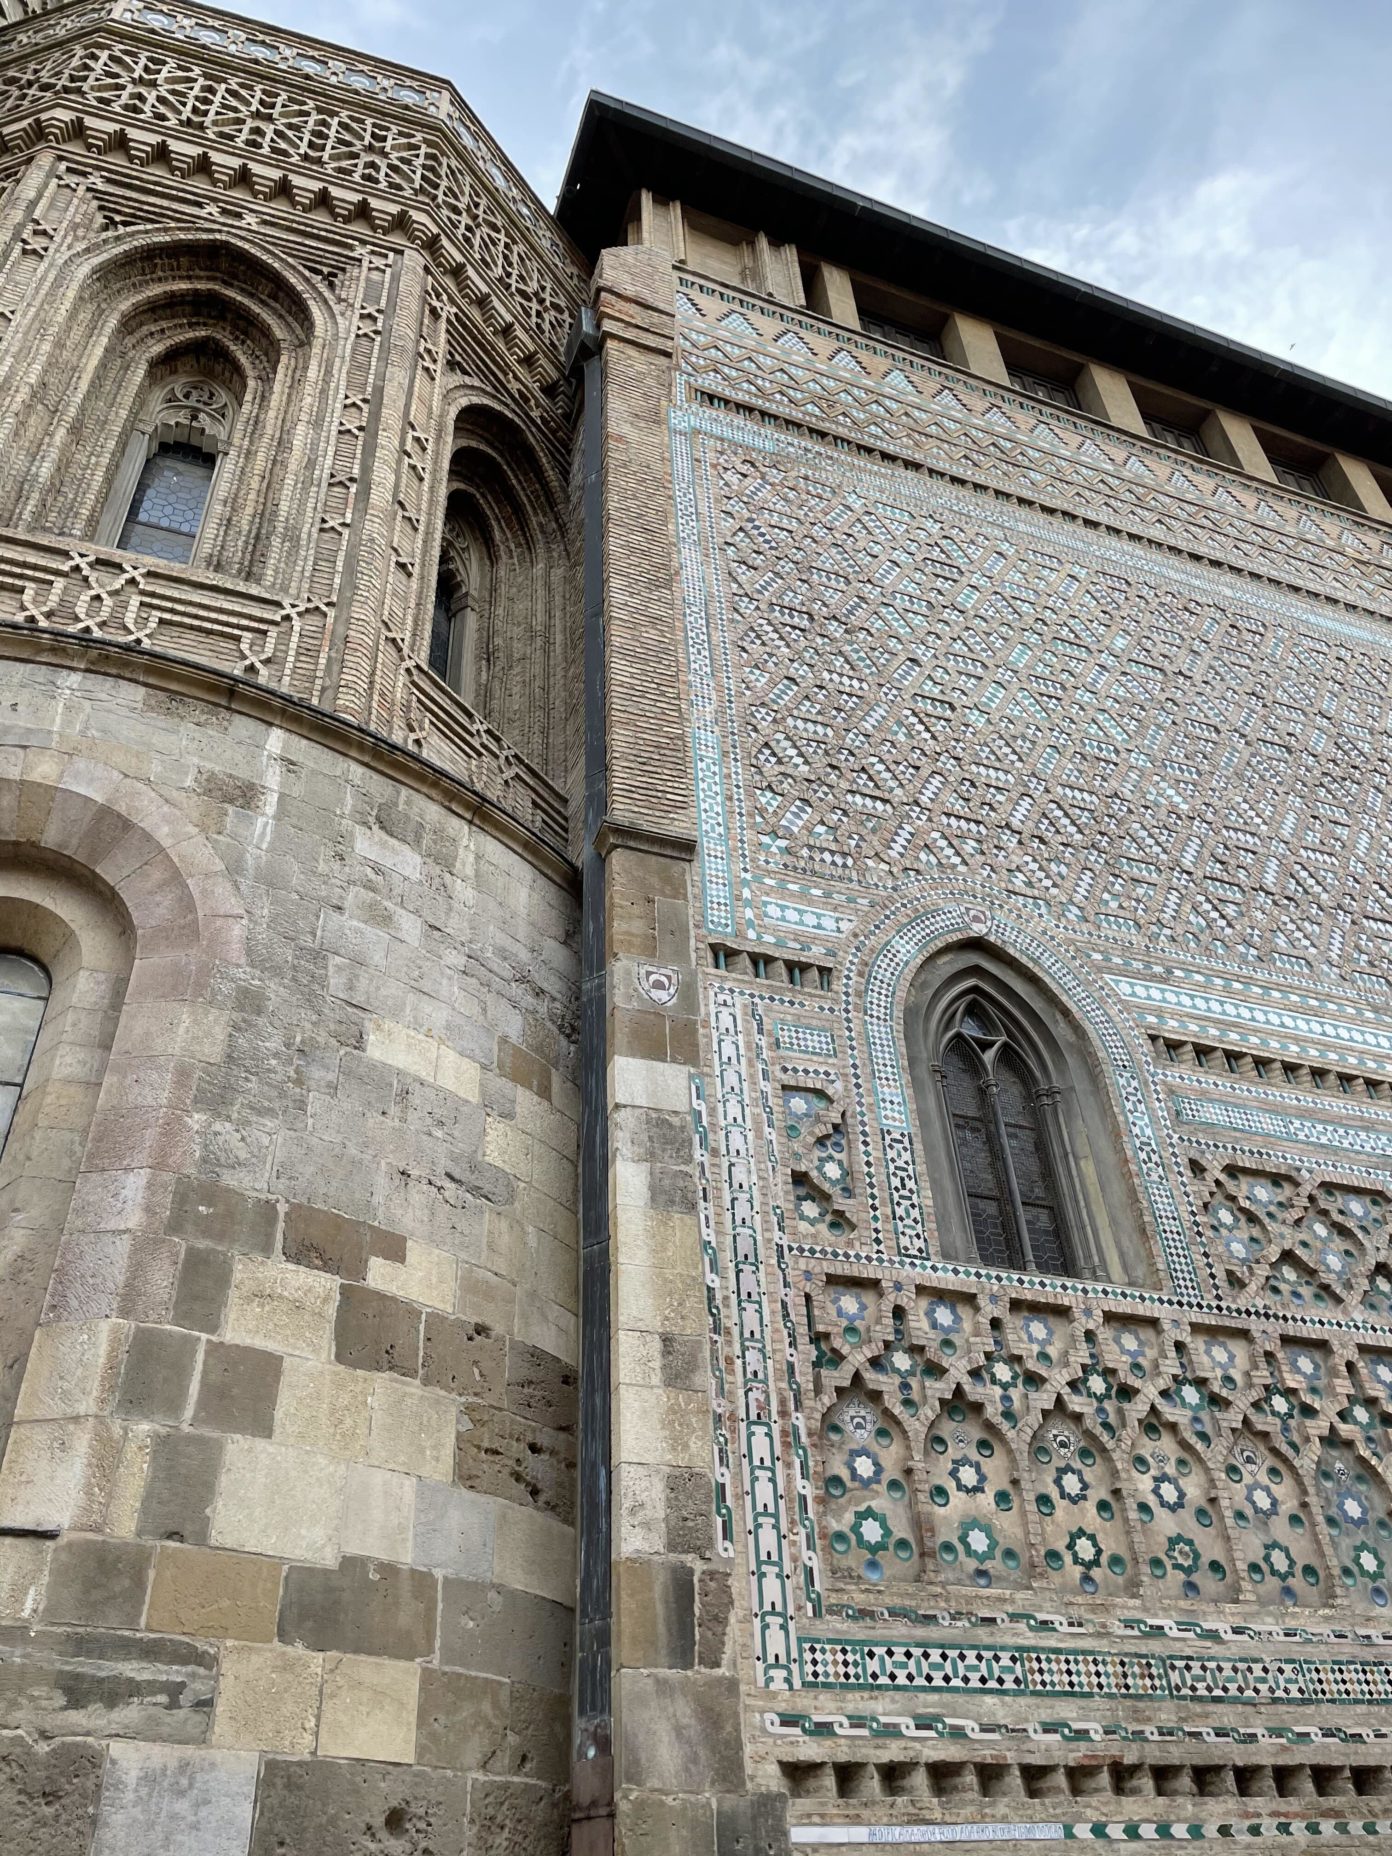 The wall of the Parroquieta de San Miguel Arcángel annexed to the Seo is one of the culminating works of Mudejar architecture. (Go Aragon)